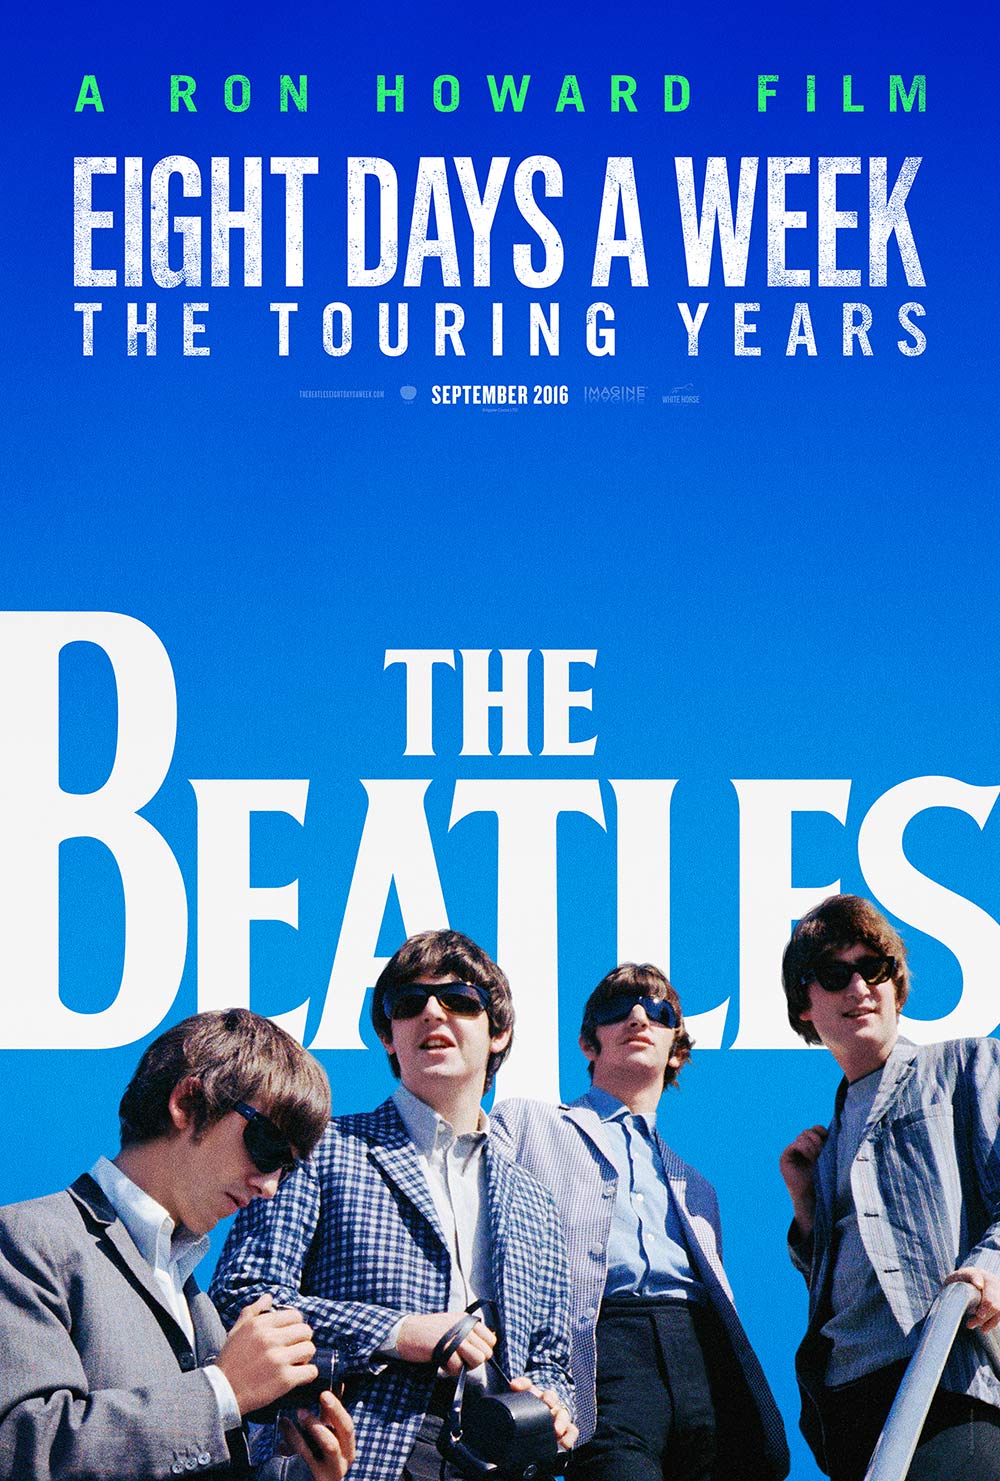 The Beatles 8 Days A Week documentary poster